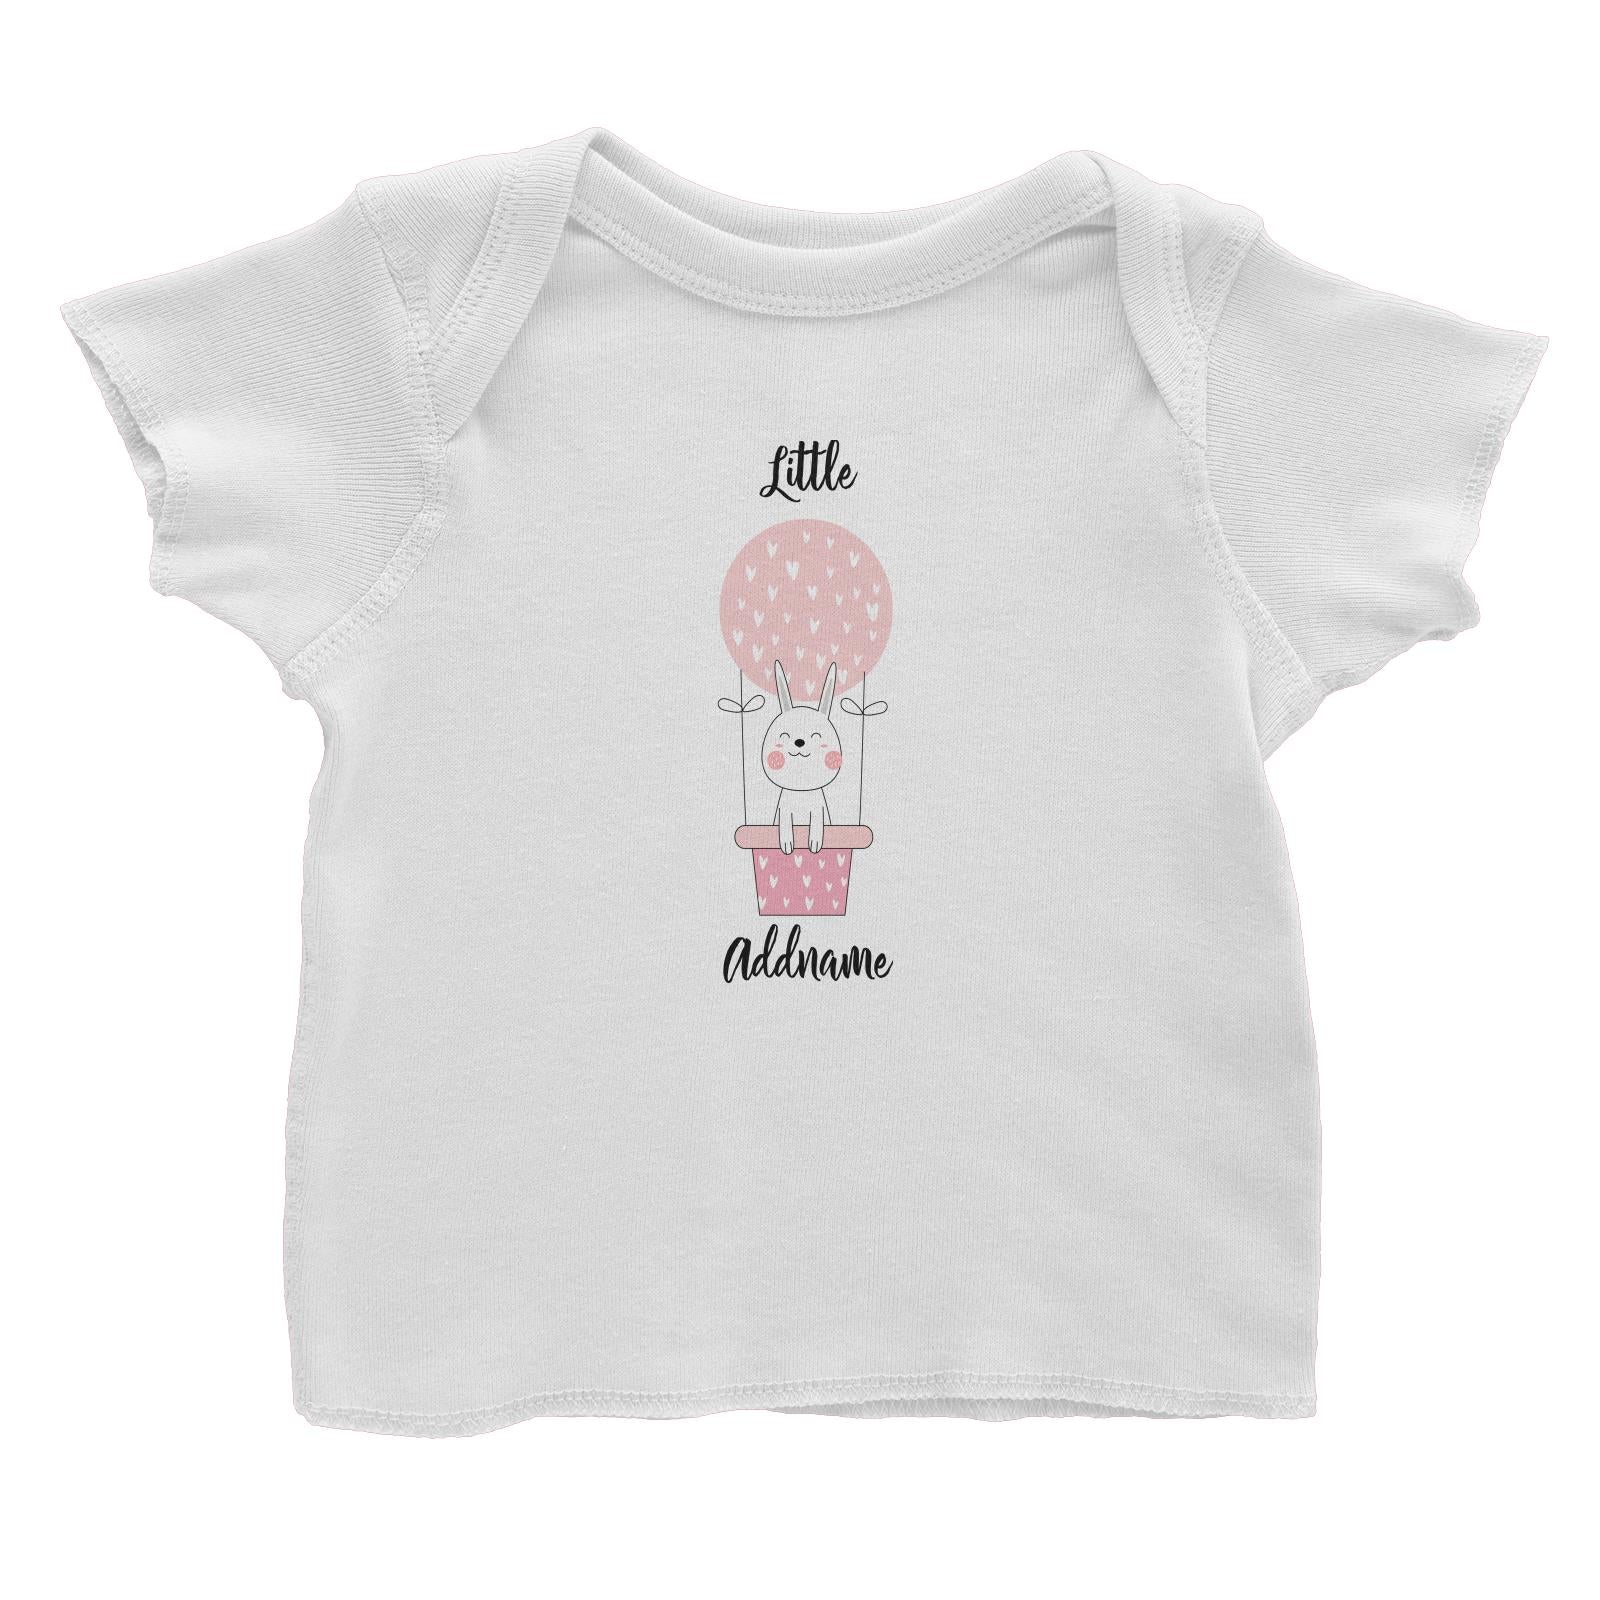 Cute Air Balloon with Rabbit Addname Baby T-Shirt